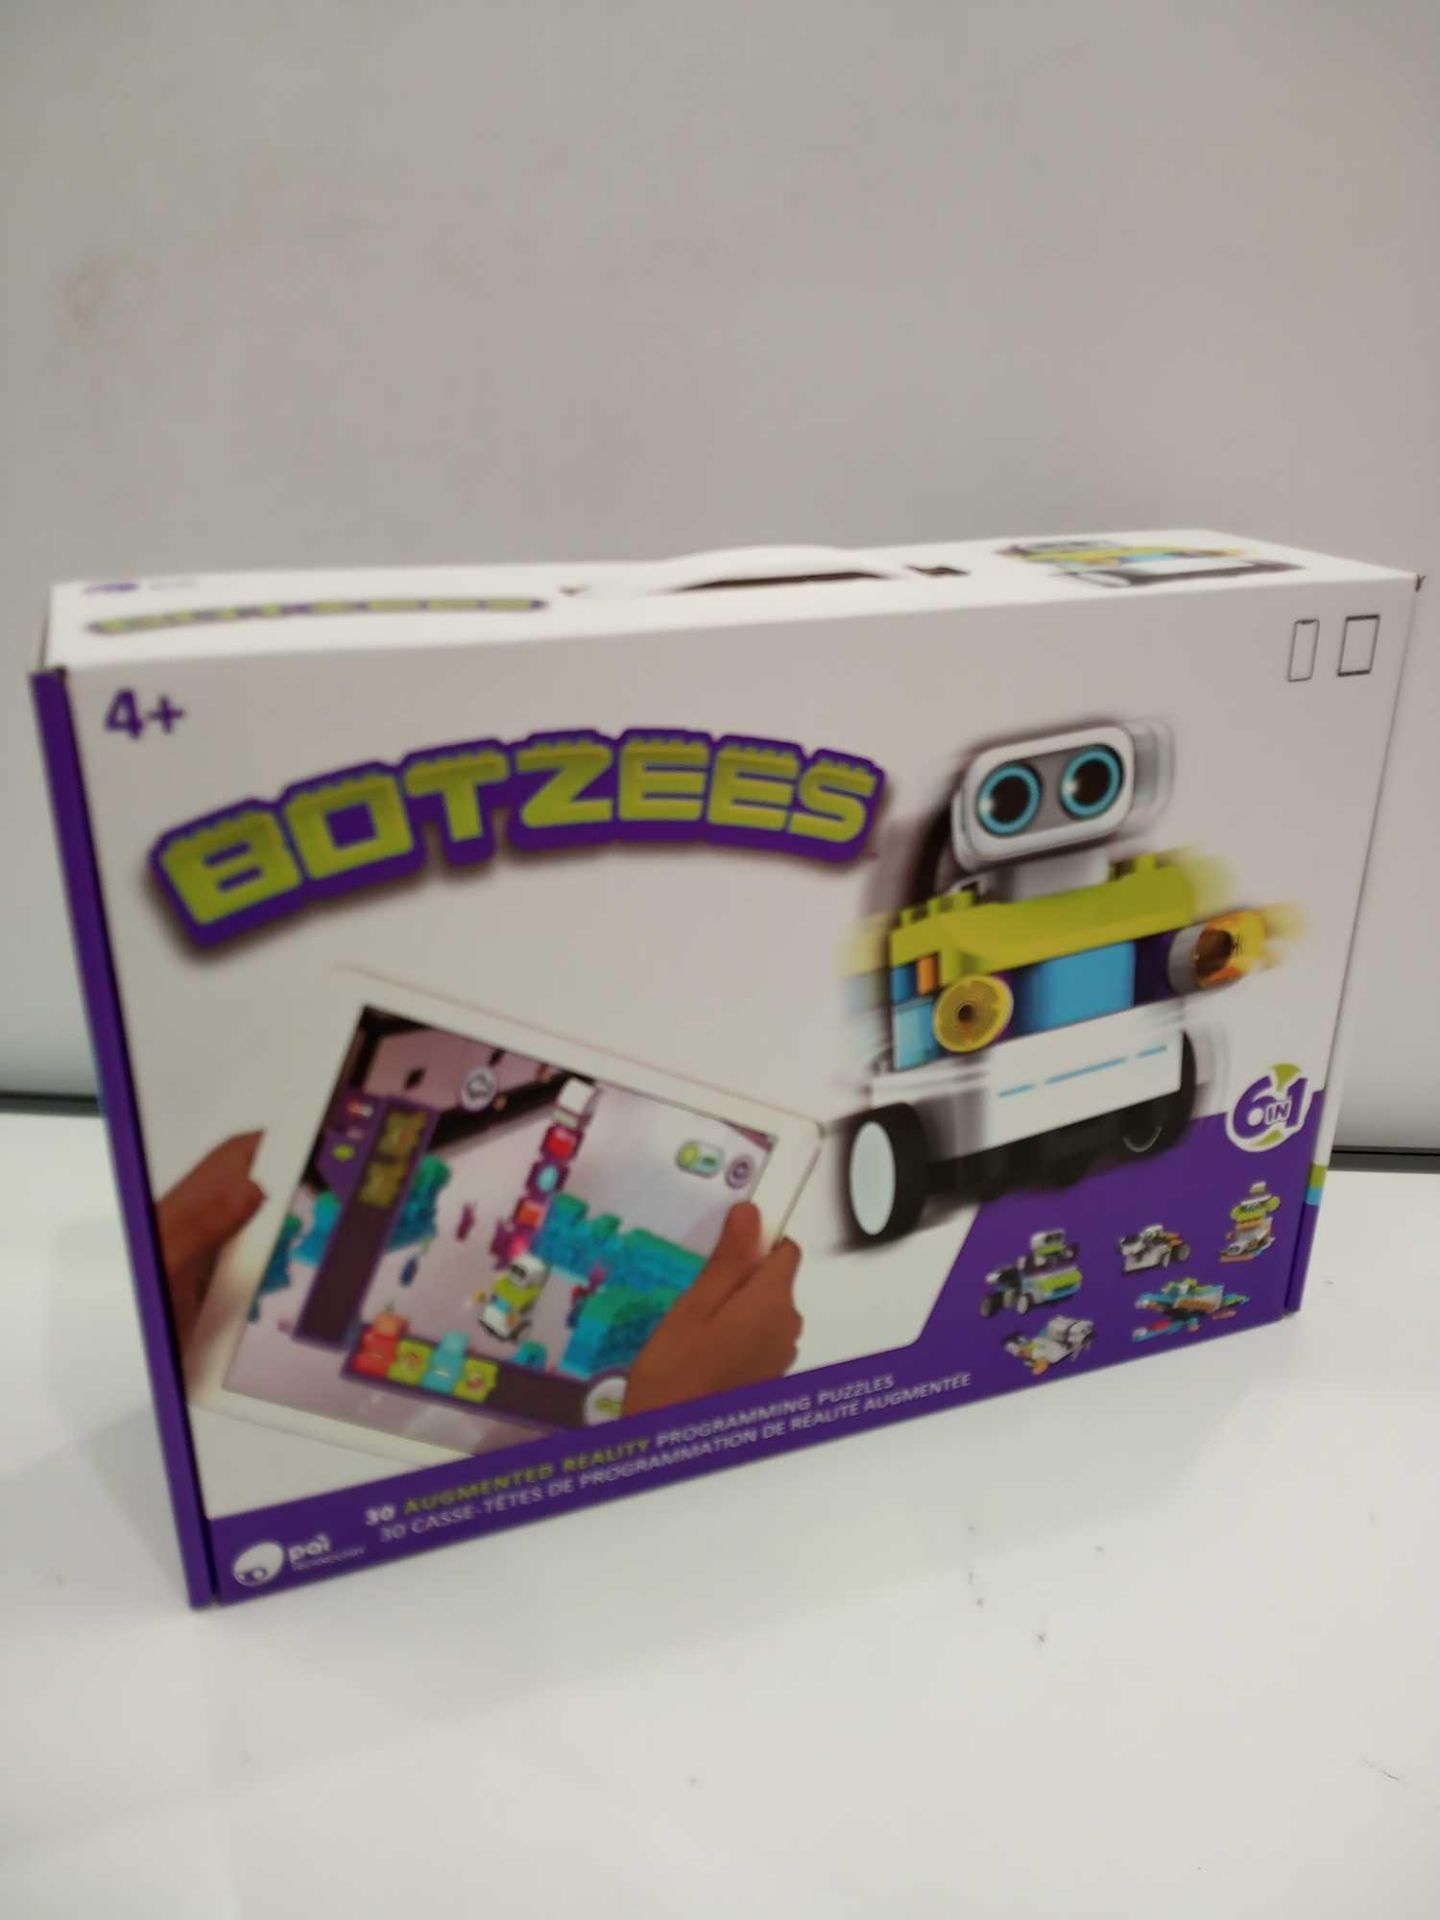 Rrp £90 Boxed Botzees 30 Augmented Reality Programming Puzzles